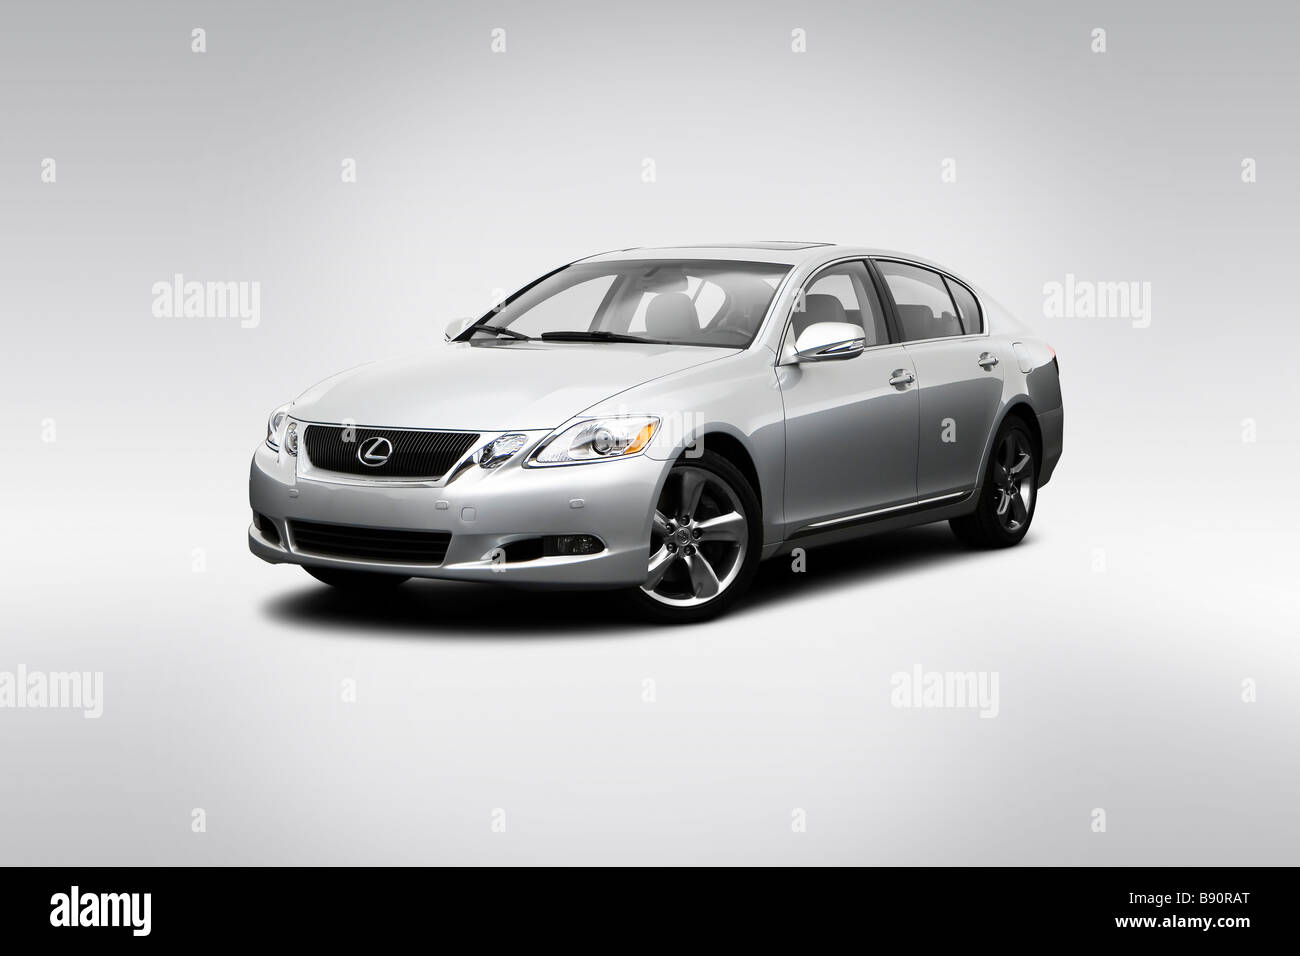 2009 Lexus GS GS350 in Gray - Front angle view Stock Photo